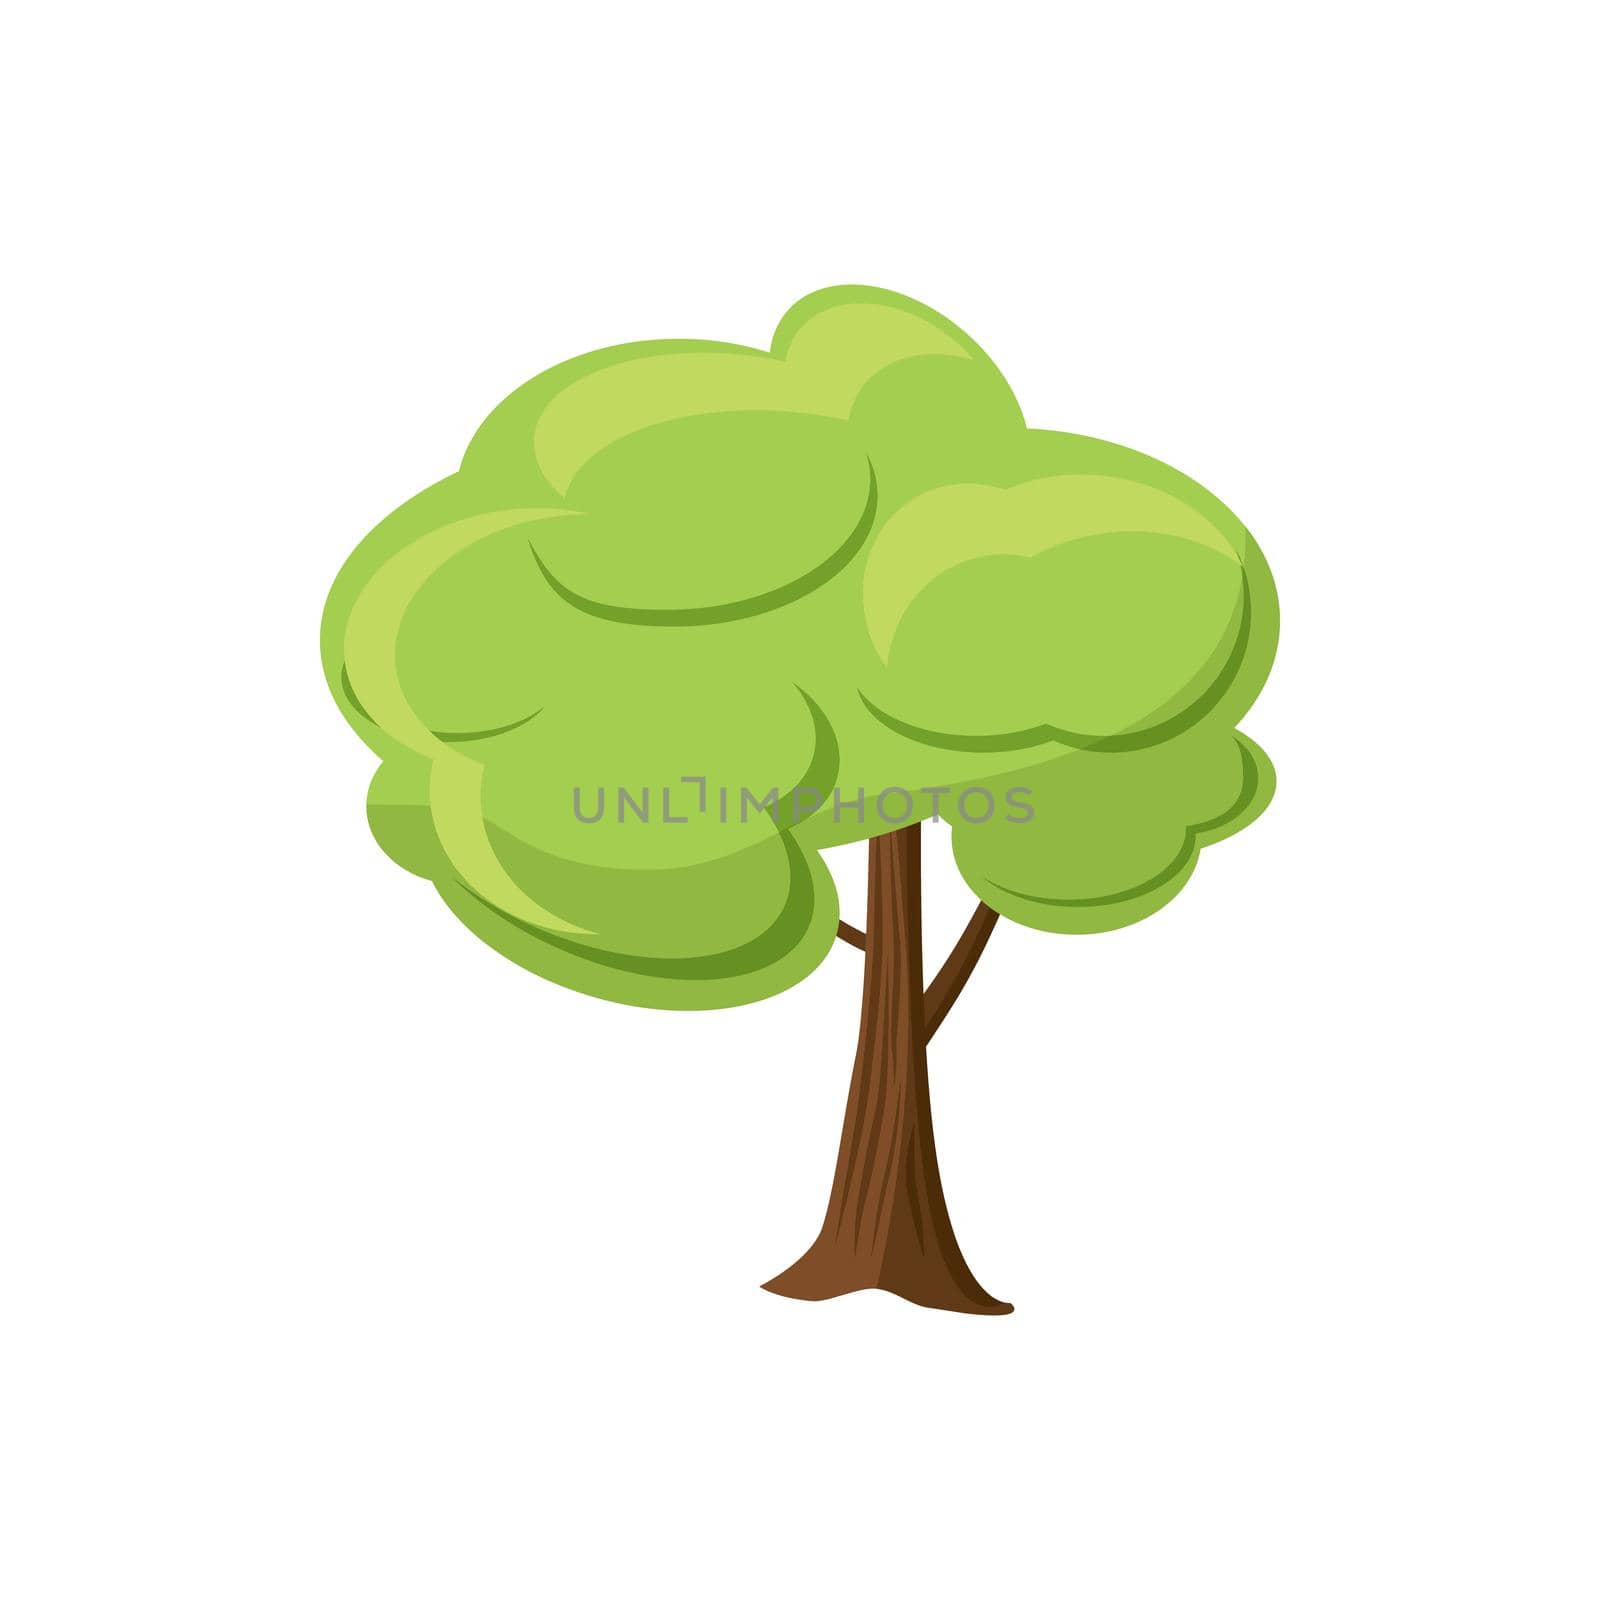 Green tree icon in cartoon style on a white background